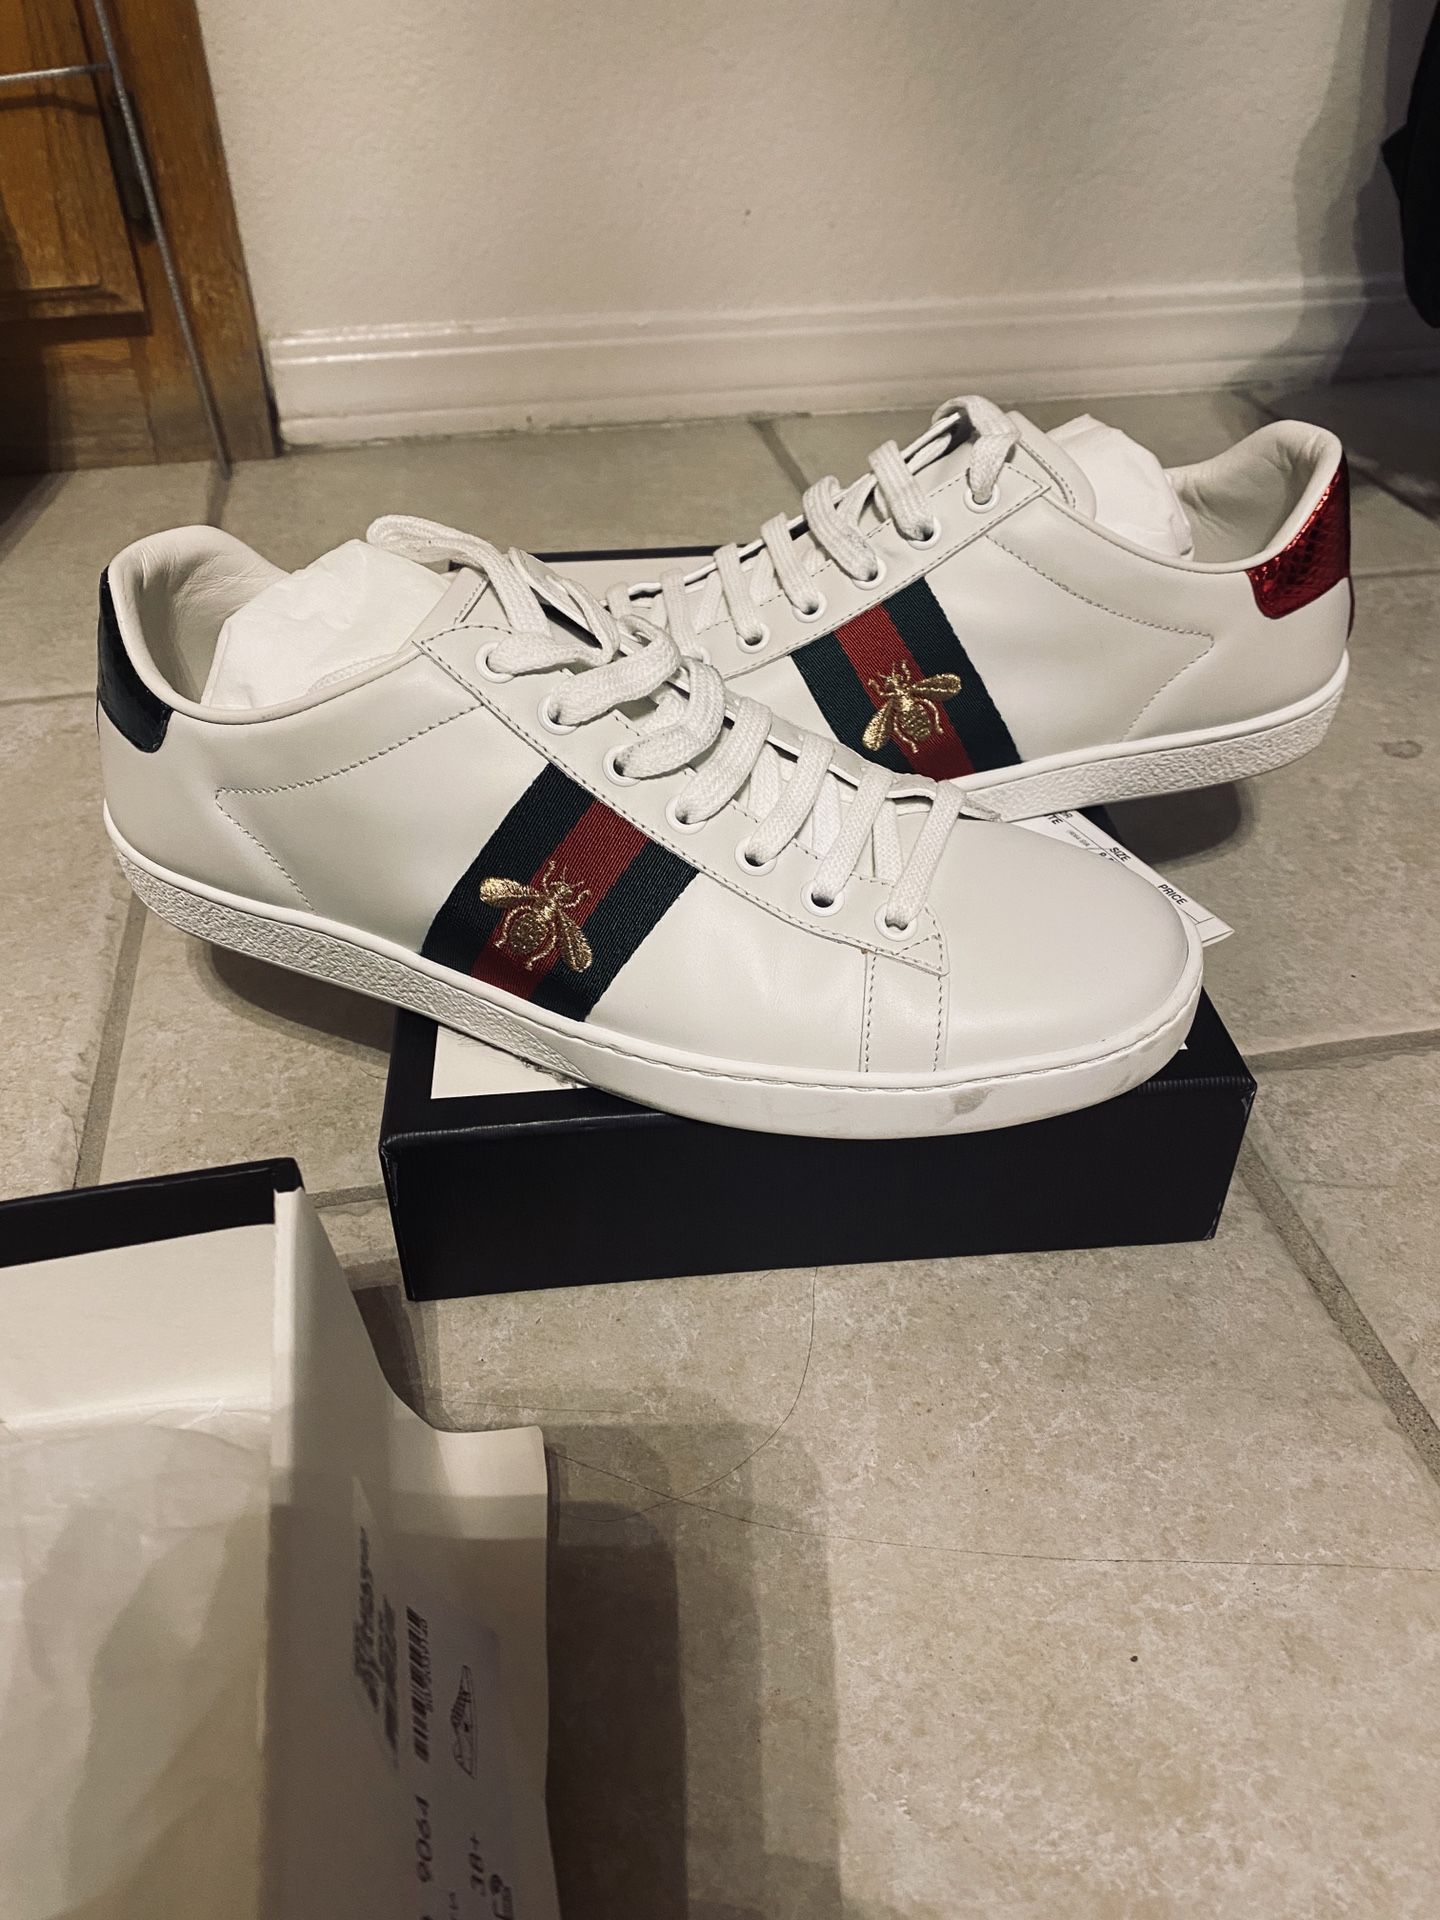 Gucci Ace Embroider Sneakers Authentic